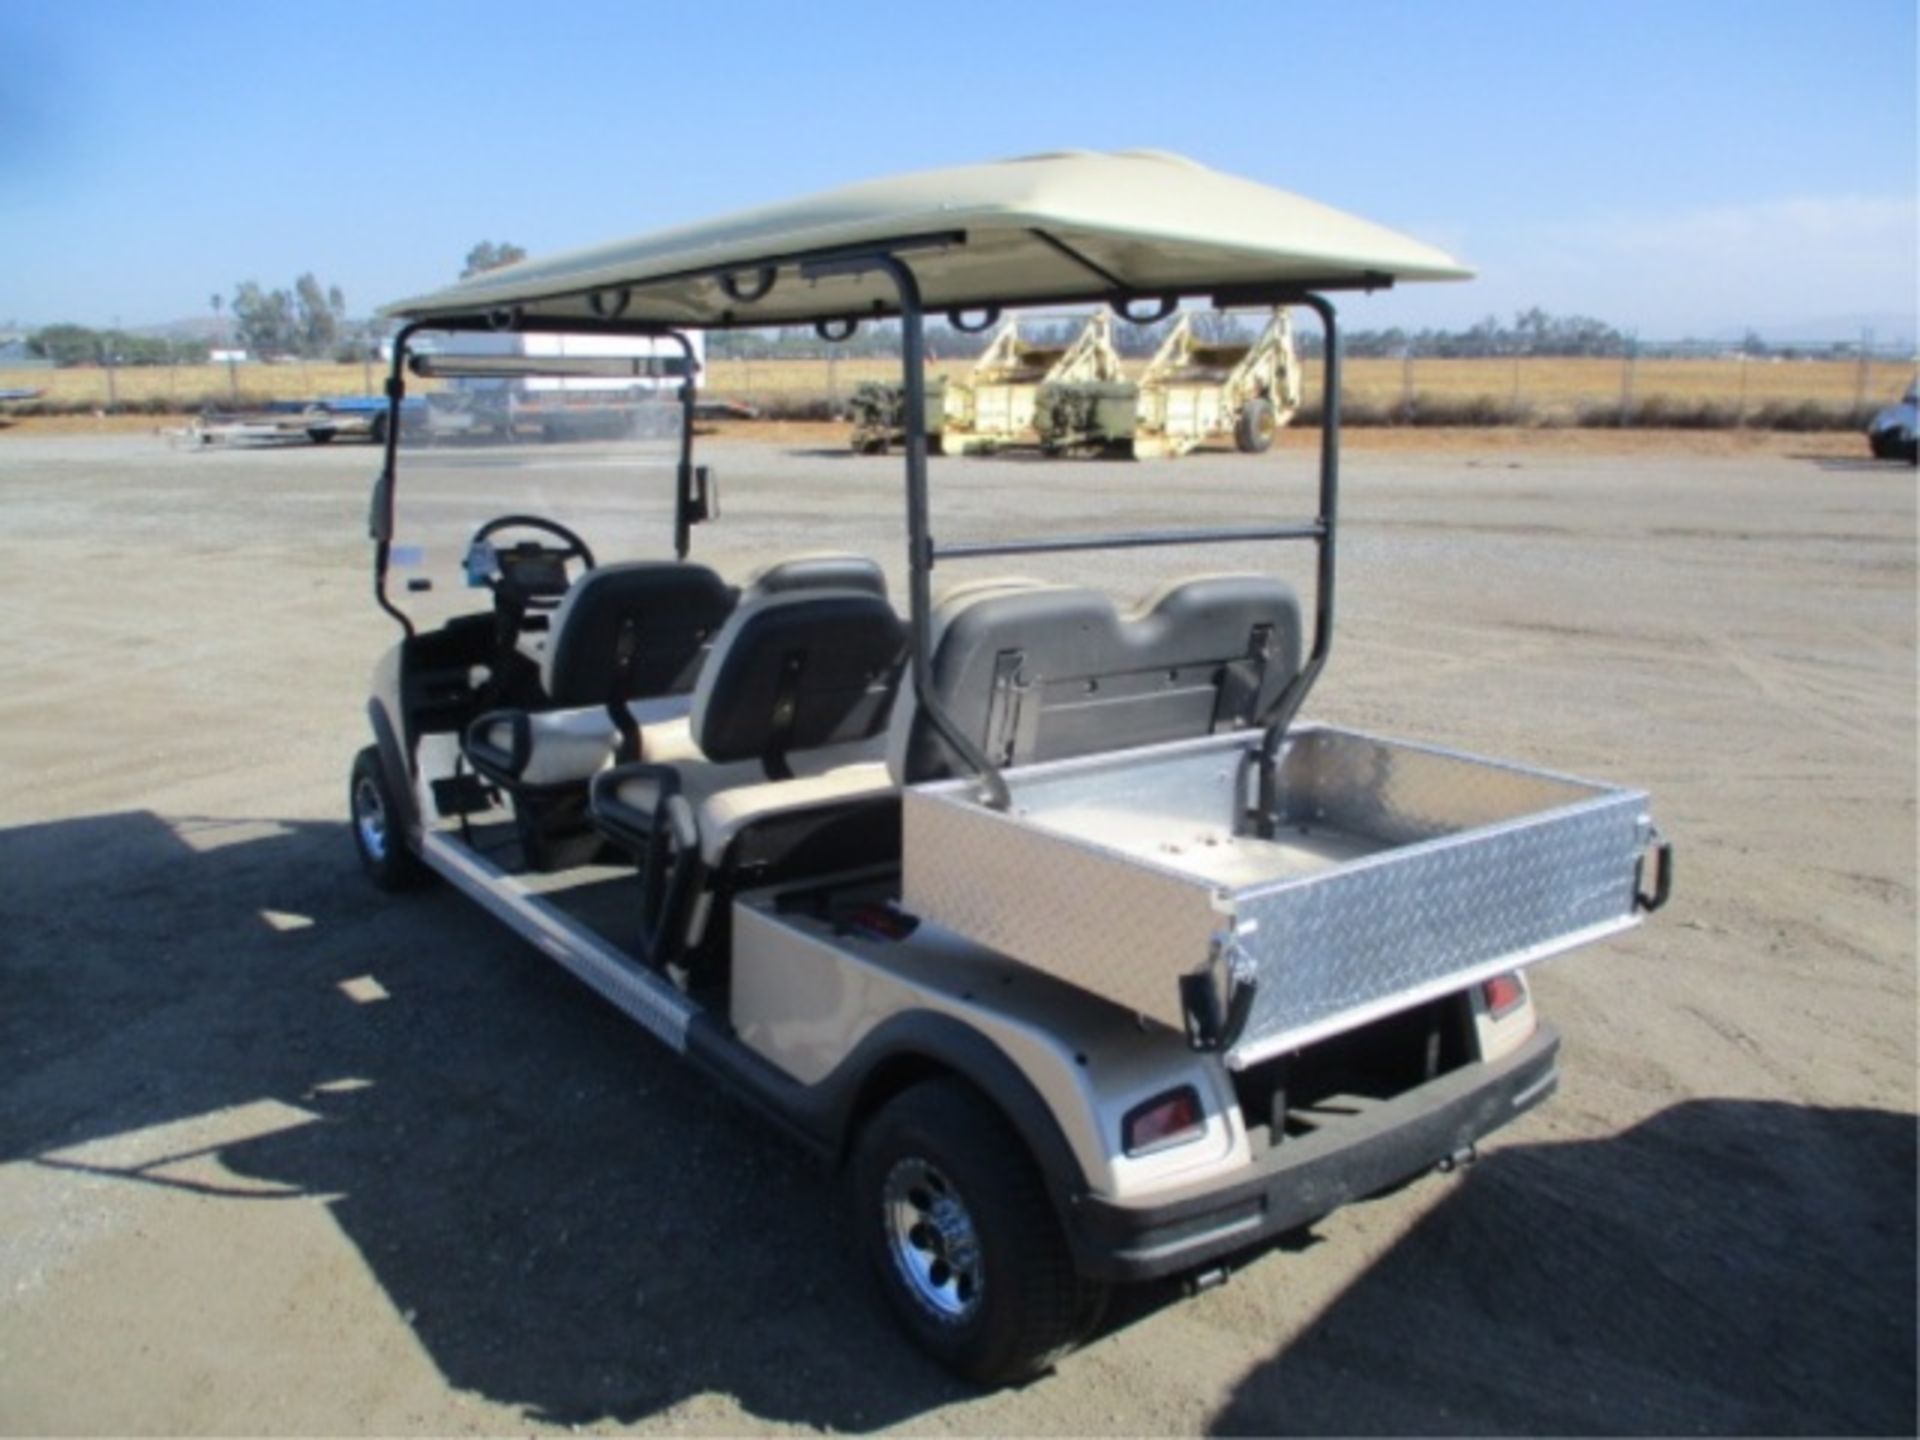 2012 Hoss Utilty Golf Cart, Electric, 6-Passenger, Rear Aluminum Bed, Built-In Charger, Canopy, S/N: - Image 14 of 32